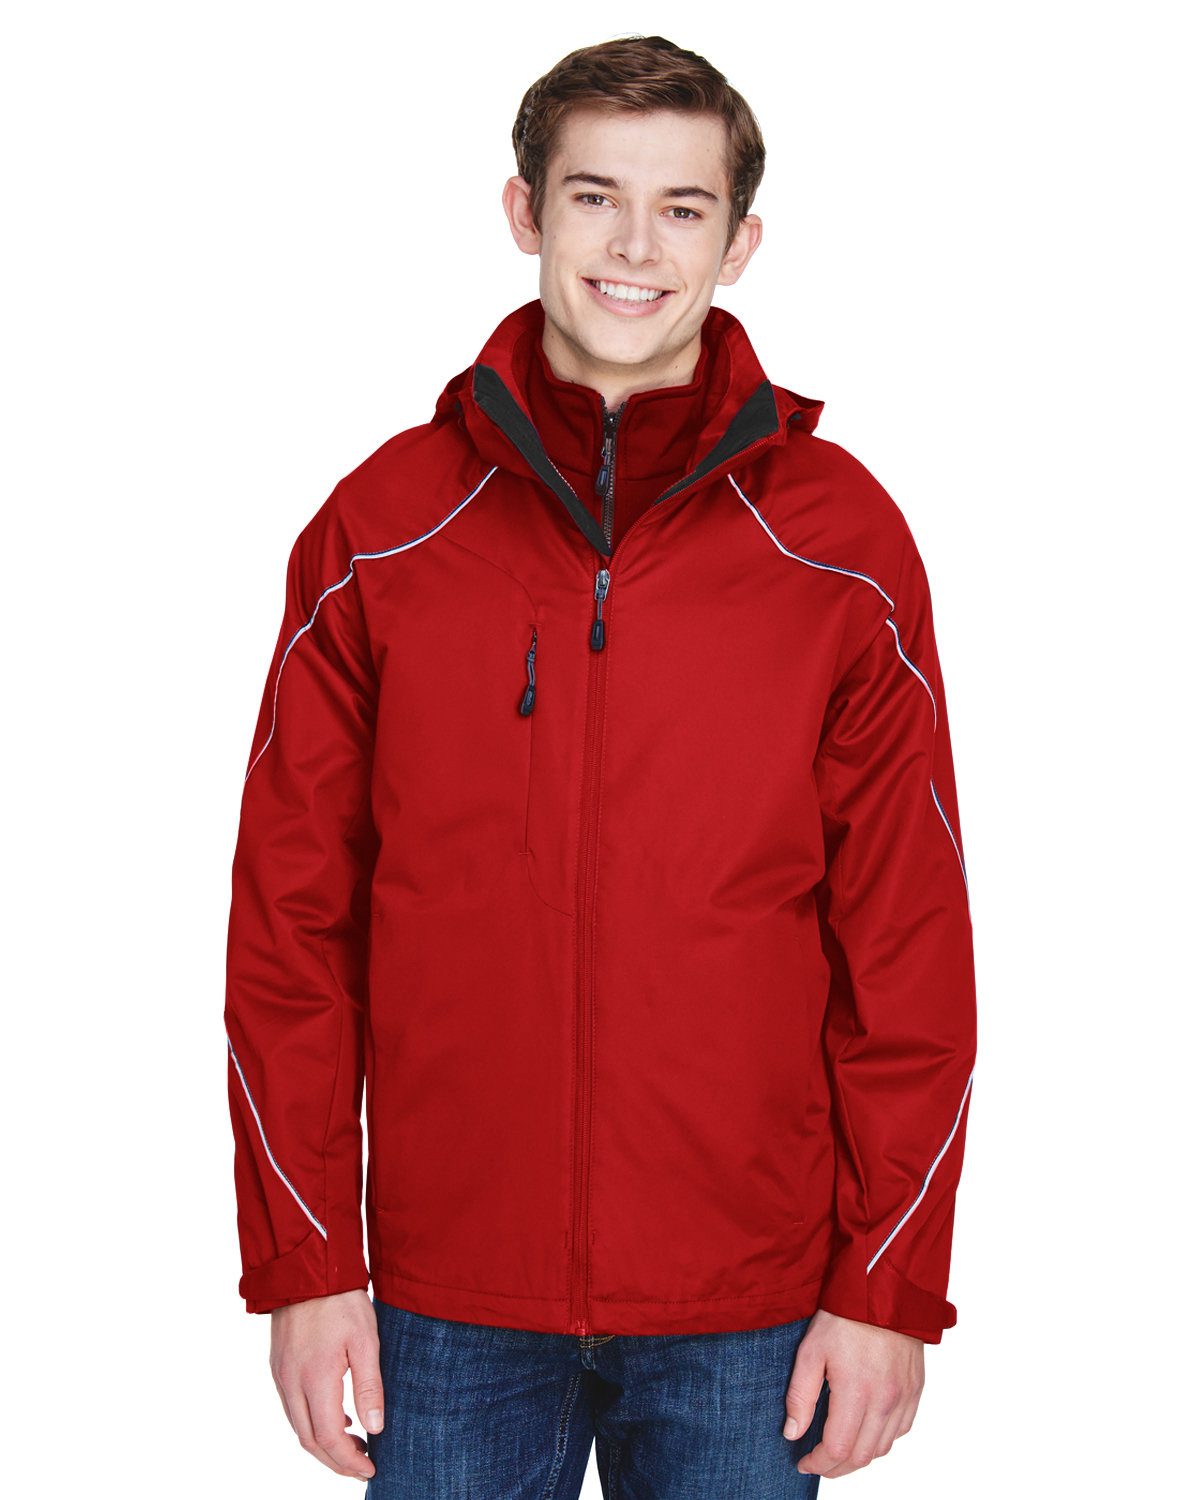 North End Men's Angle 3-in-1 Jacket with Bonded Fleece Liner #88196 Red